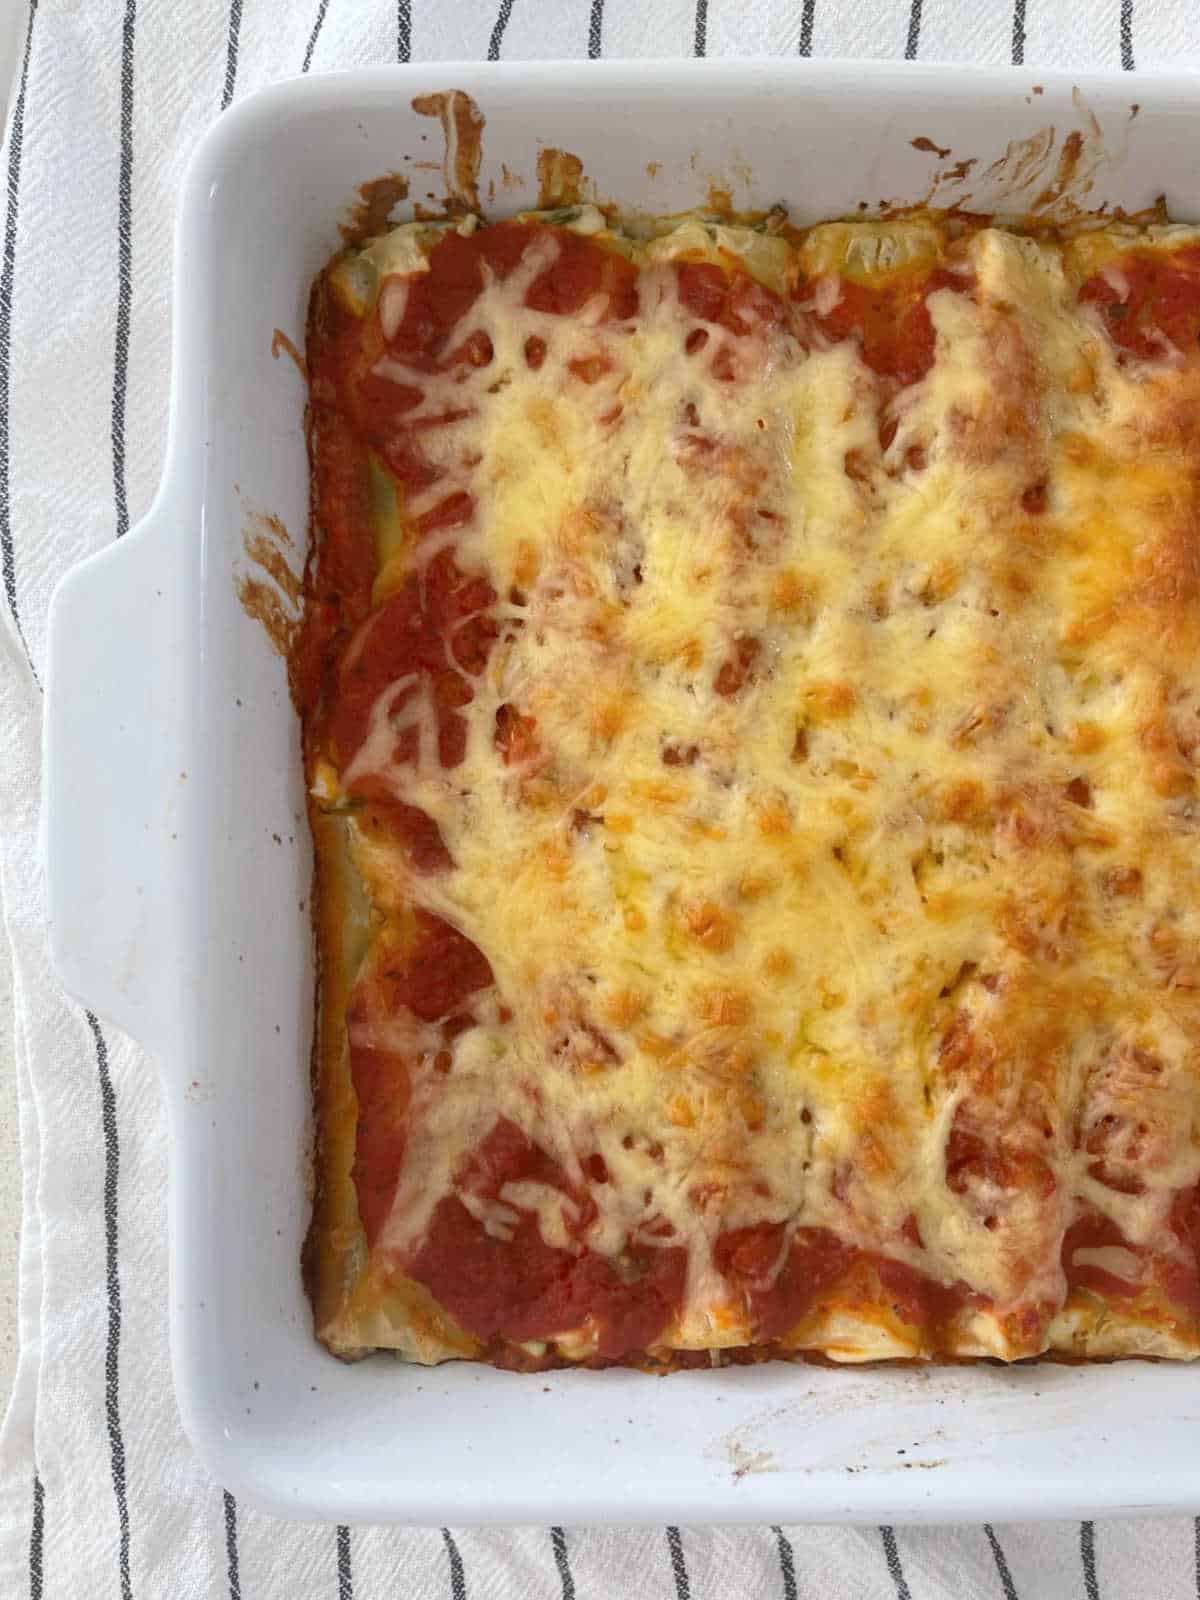 Baked Spinach and Ricotta Cannelloni in baking dish sitting on a blue and white striped towel.